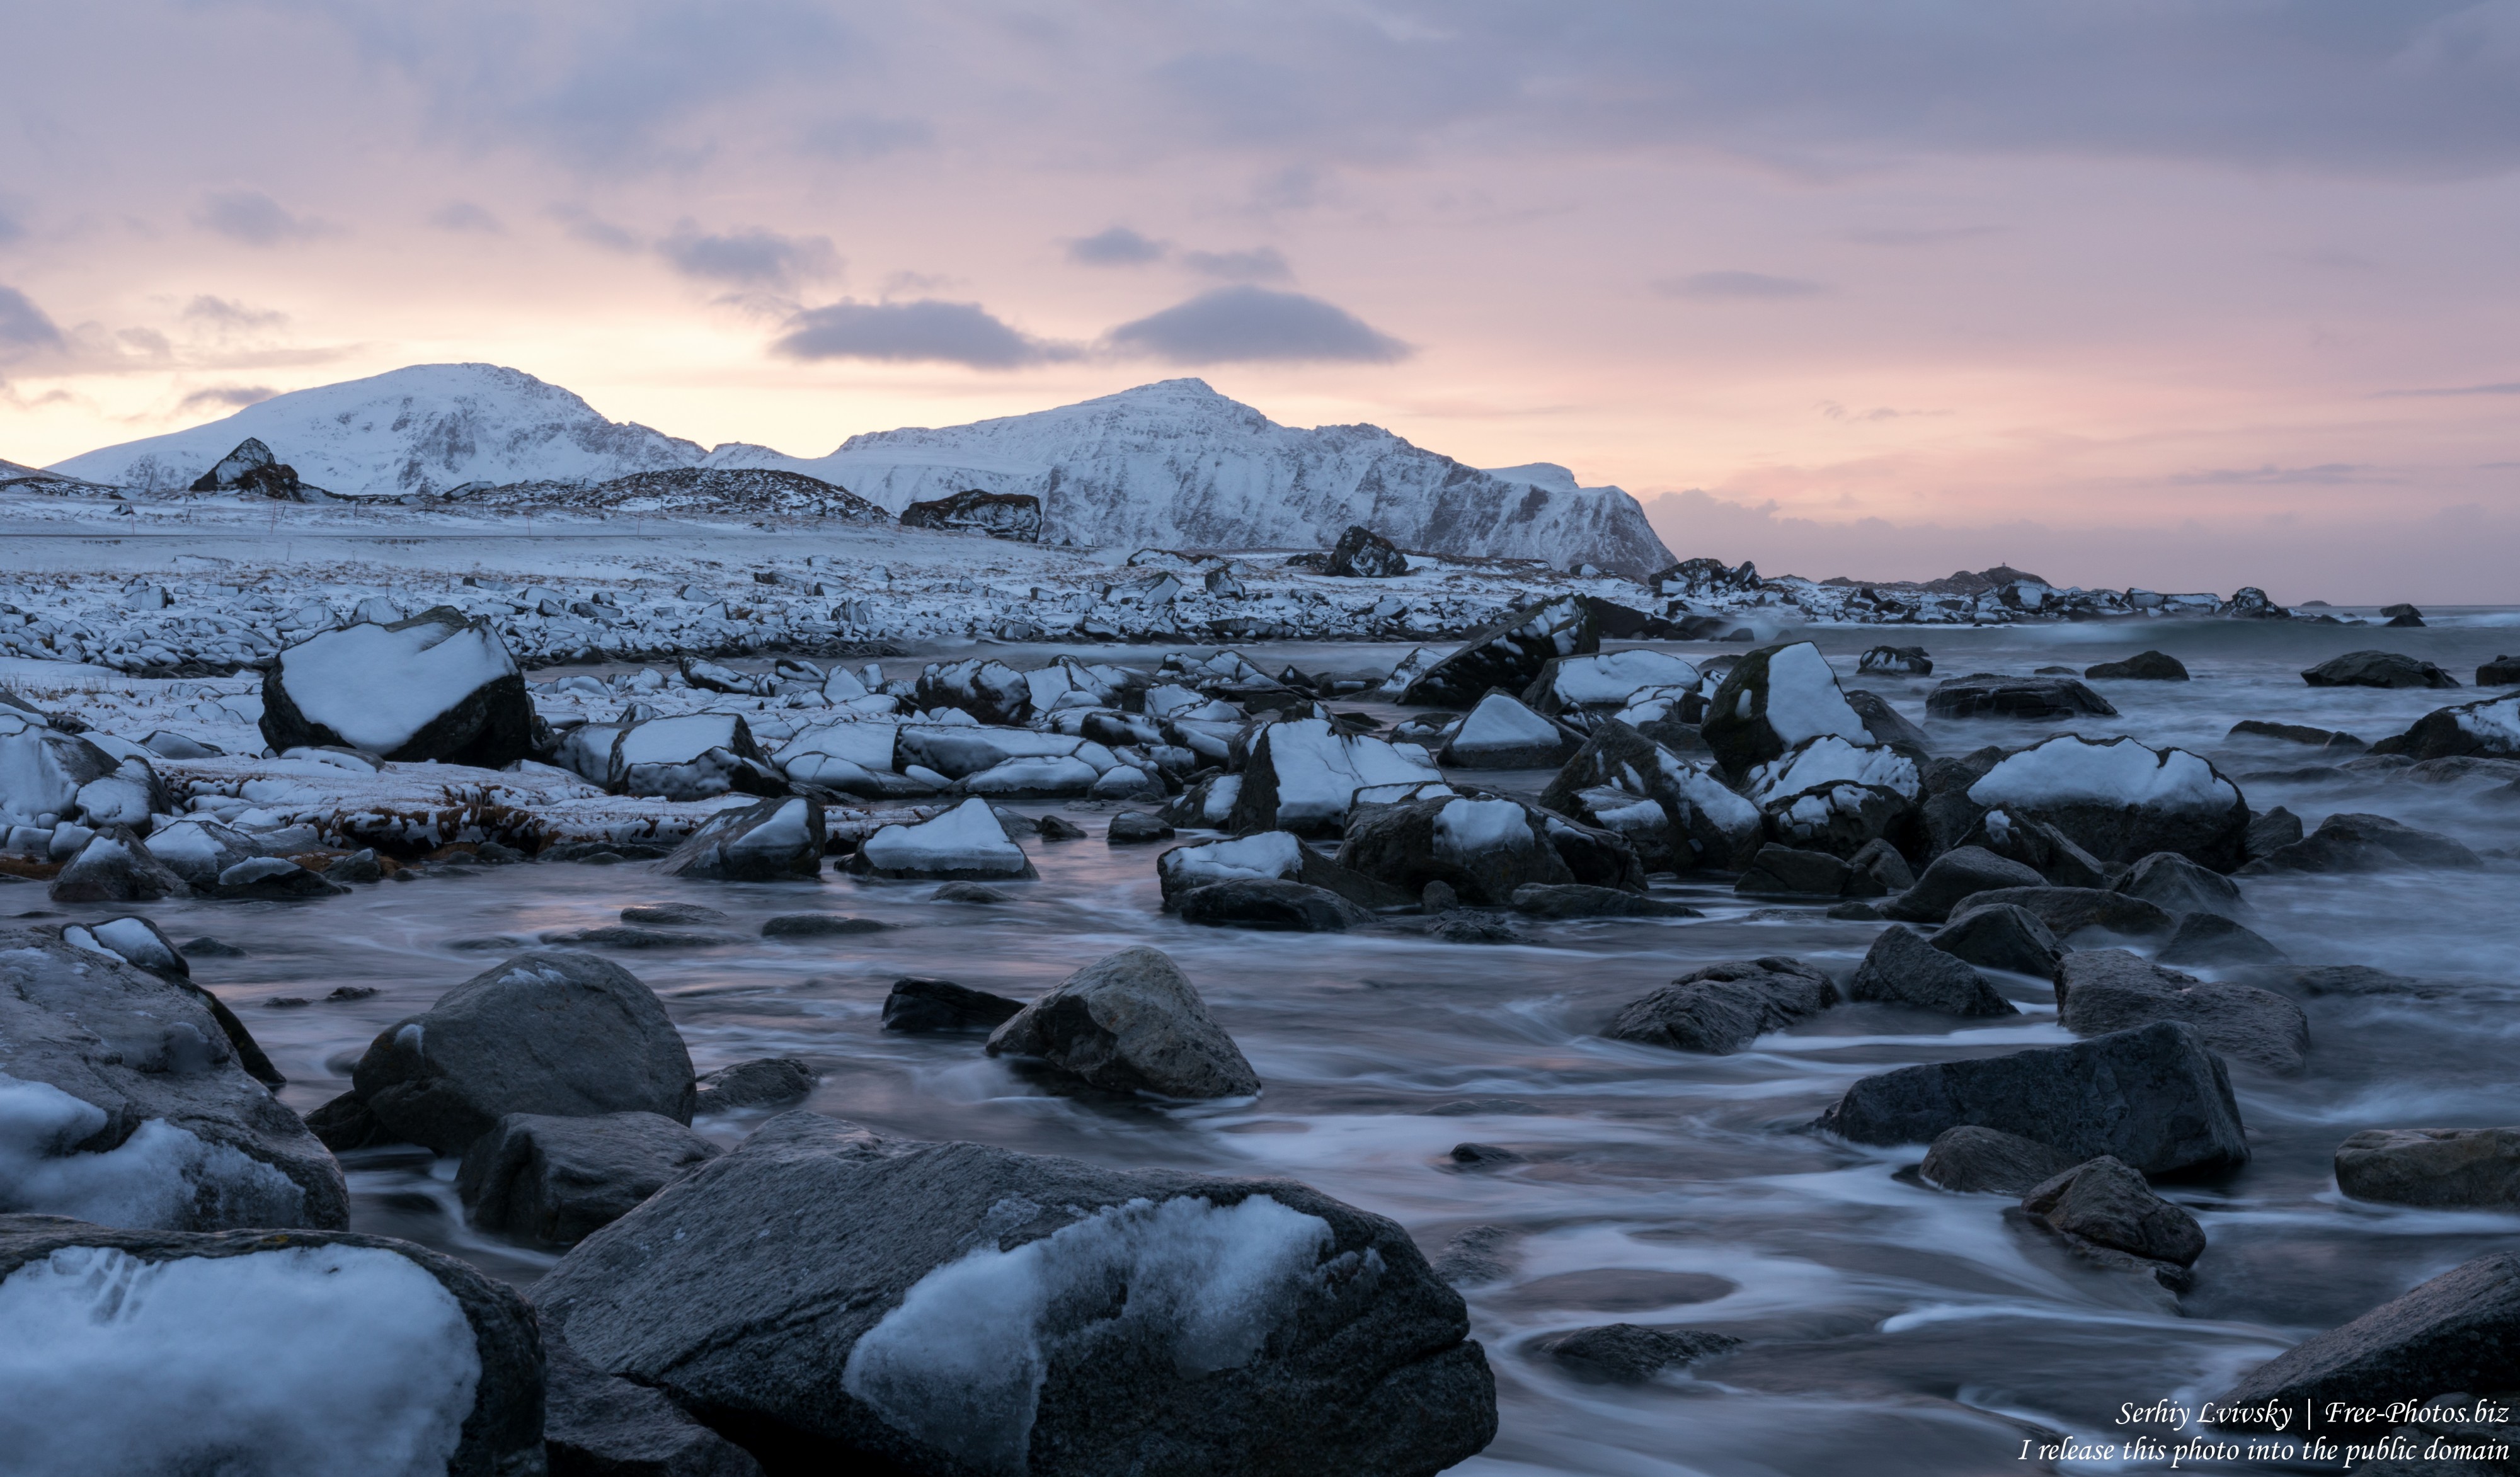 Skagsanden beach, Norway, photographed in February 2020 by Serhiy Lvivsky, picture 4